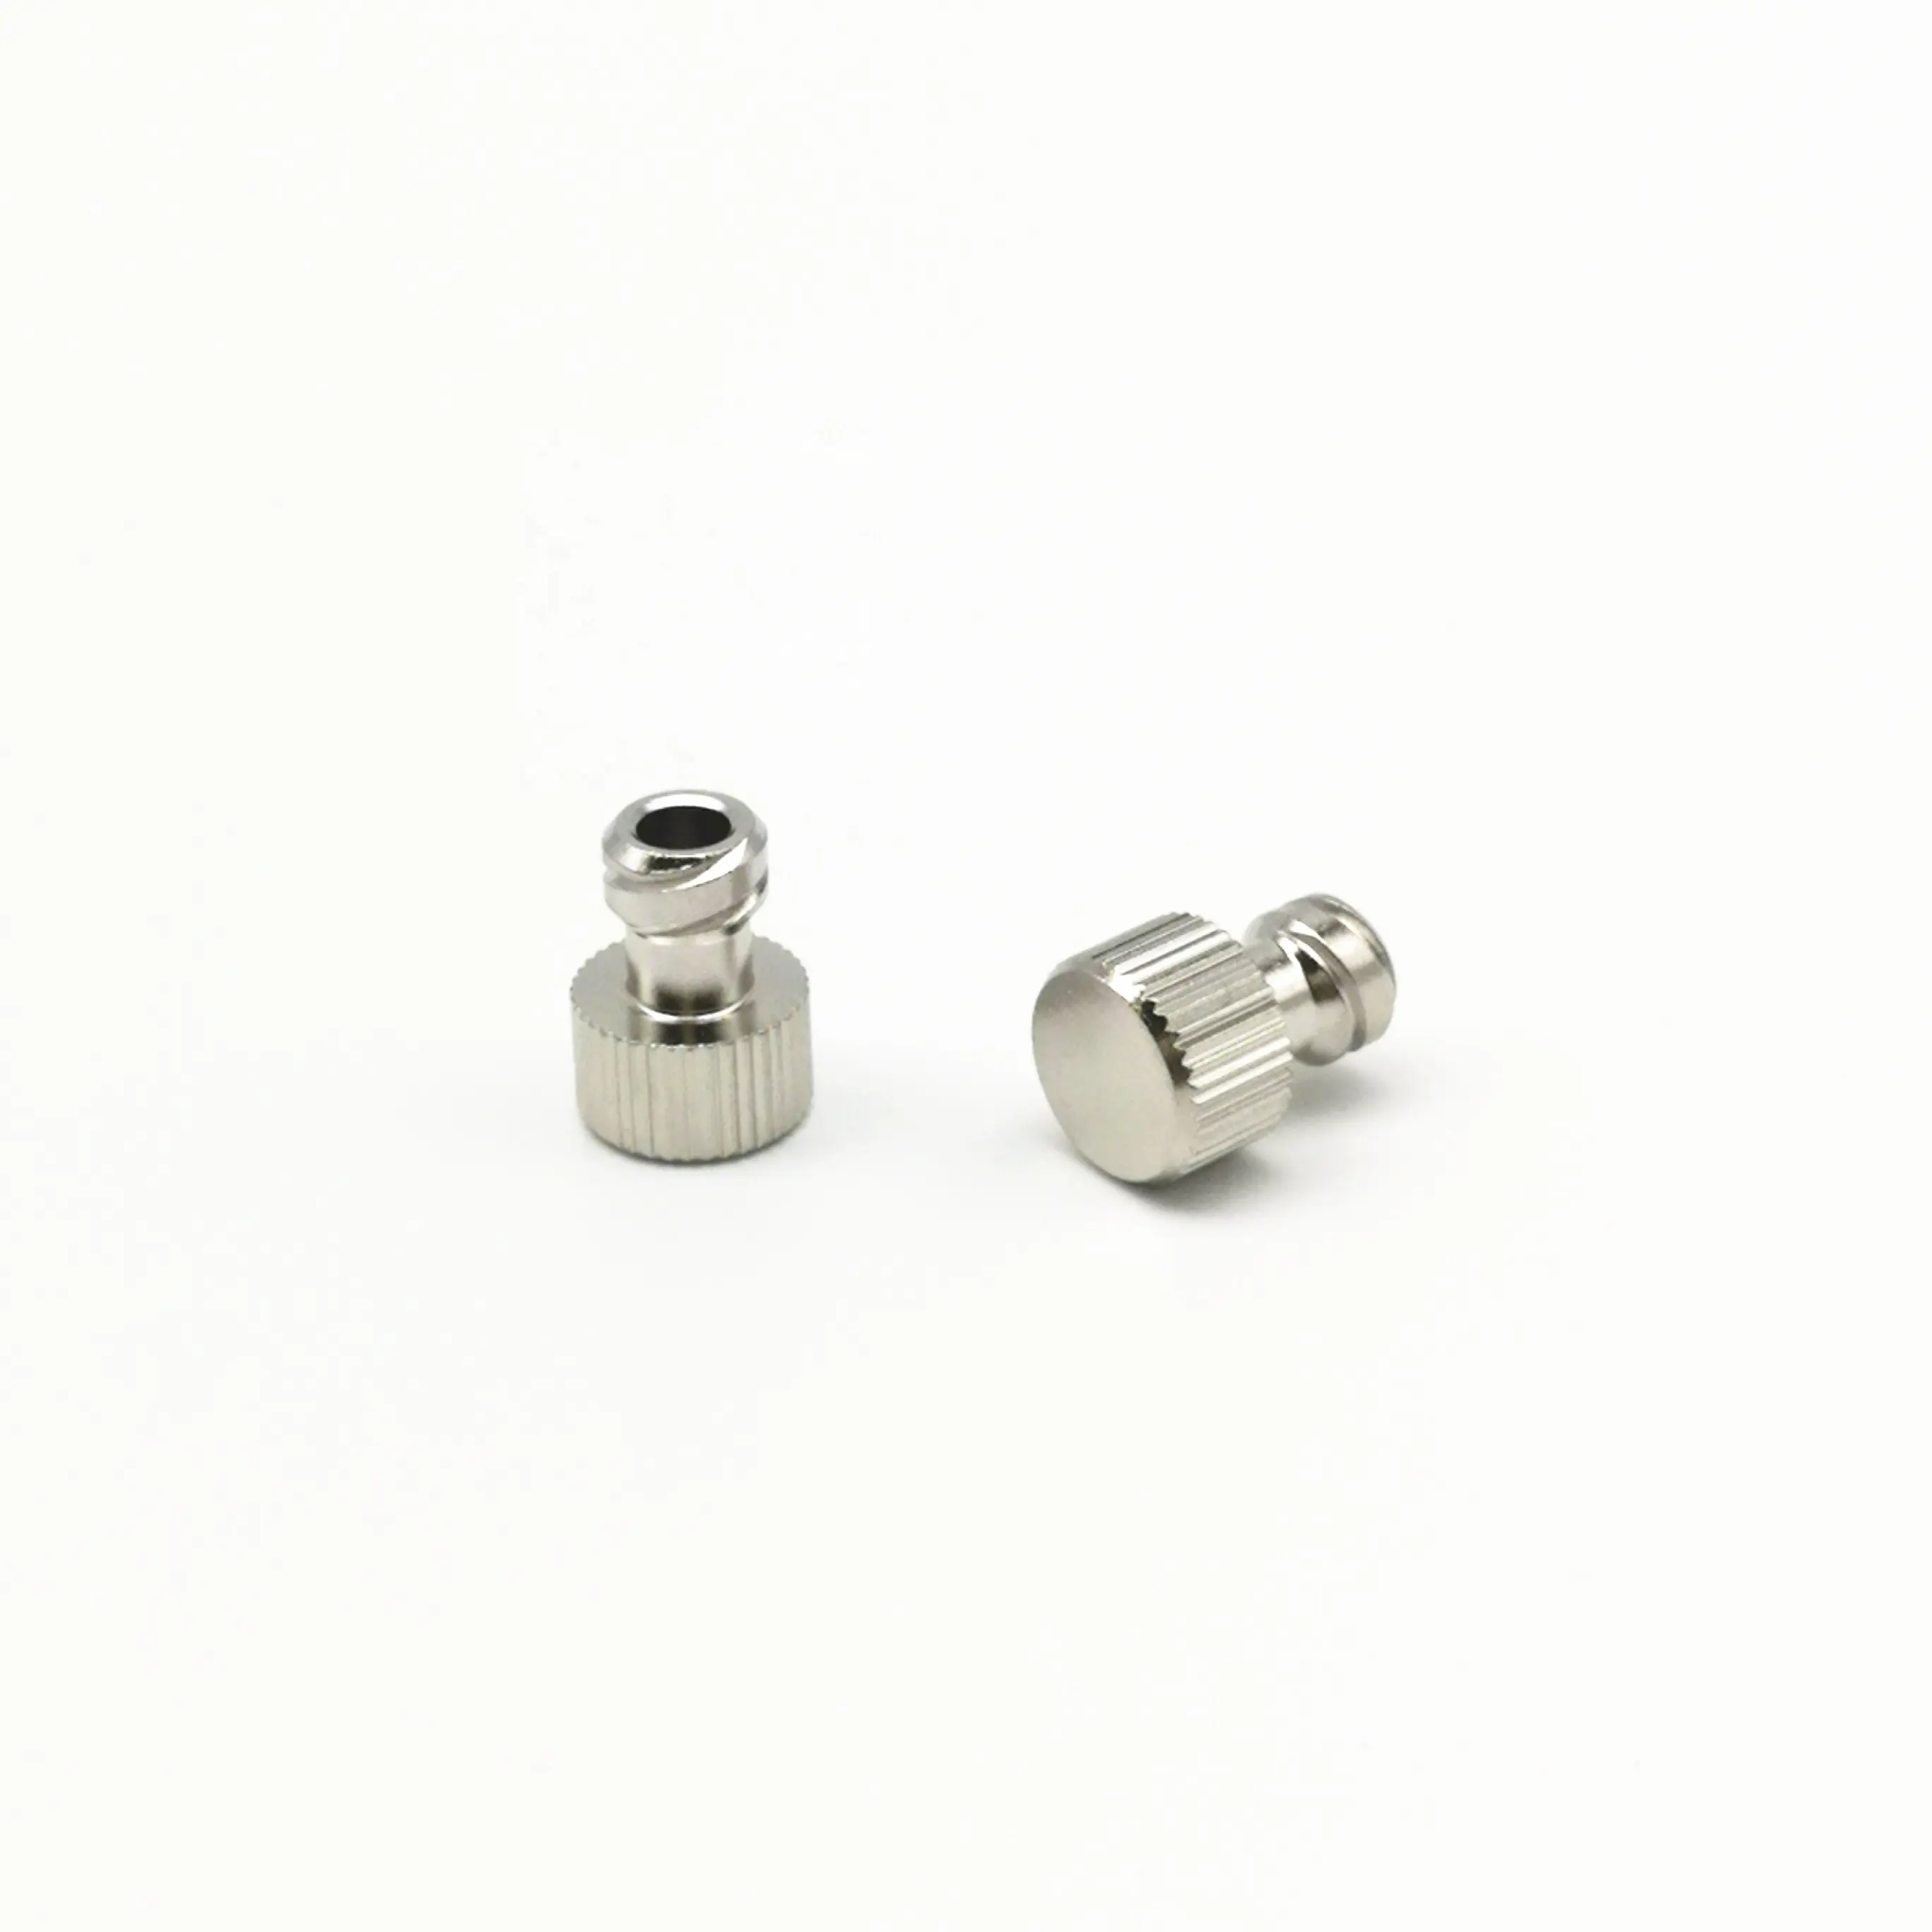 metal luer fitting nickel-plated brass adhesive dispensing guel syringe plug female luer cap